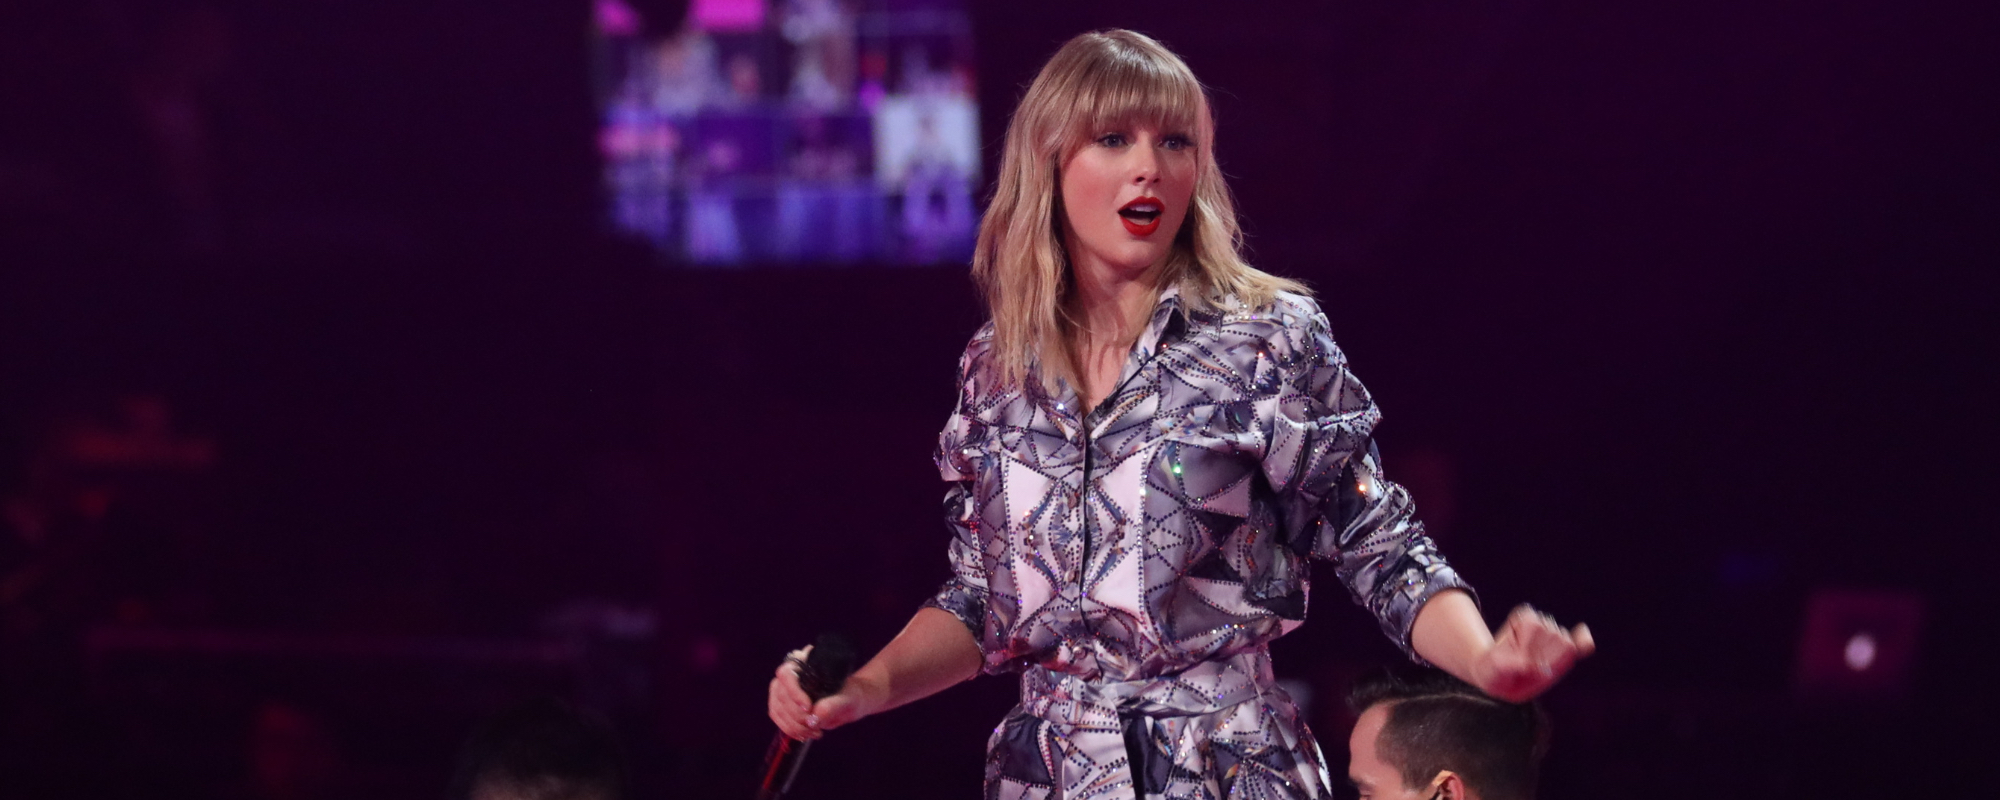 The Meaning Behind Taylor Swift’s Pop Smash “Style”